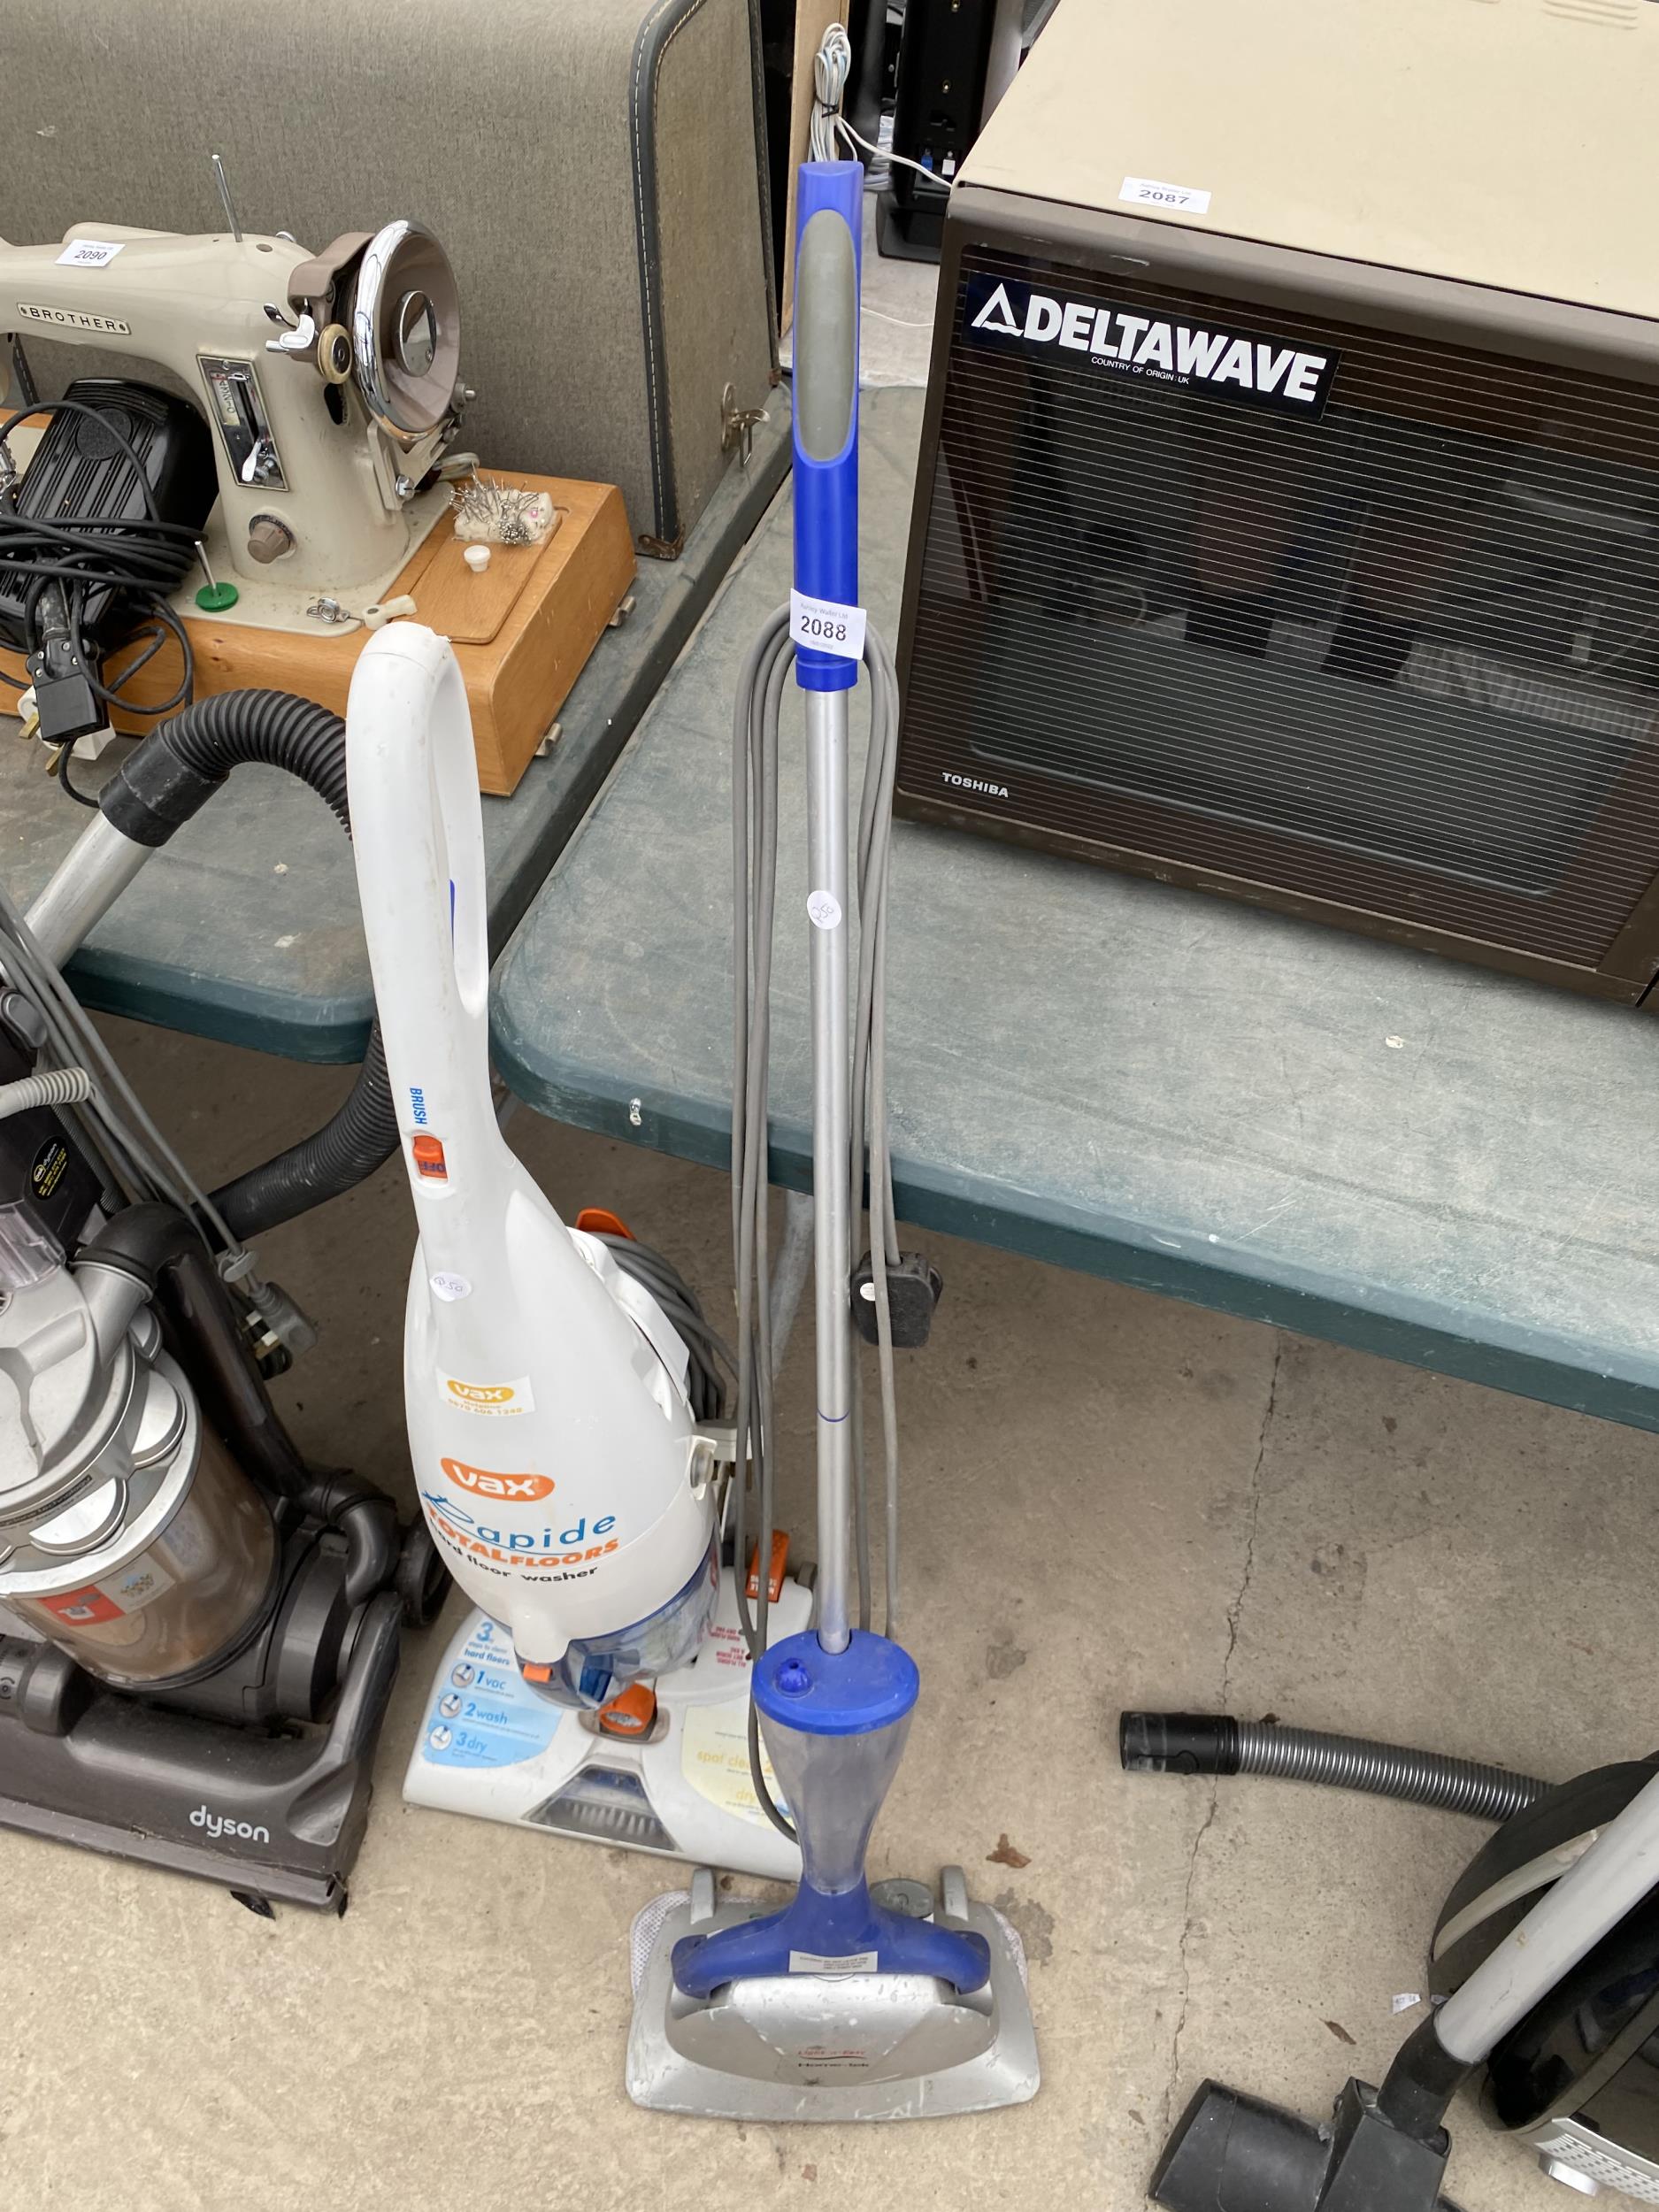 A HOME-TEK STEAM MOP AND A FURTHER VAX HARDFLOOR WASHER